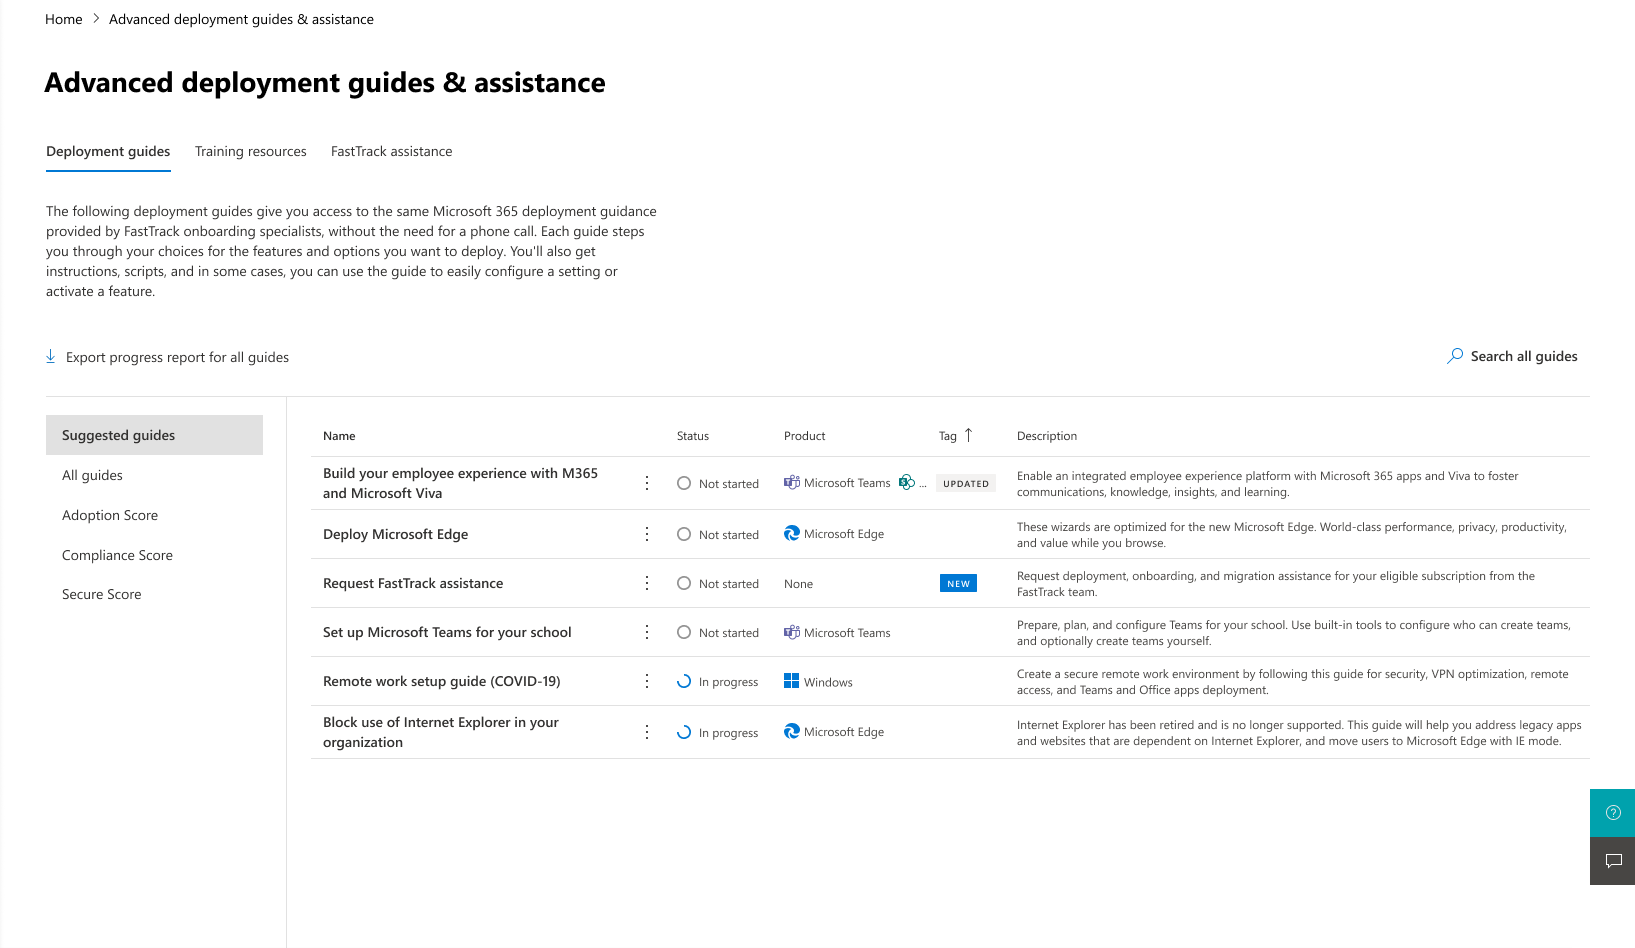 Advanced deployment guides page in the Microsoft 365 admin center